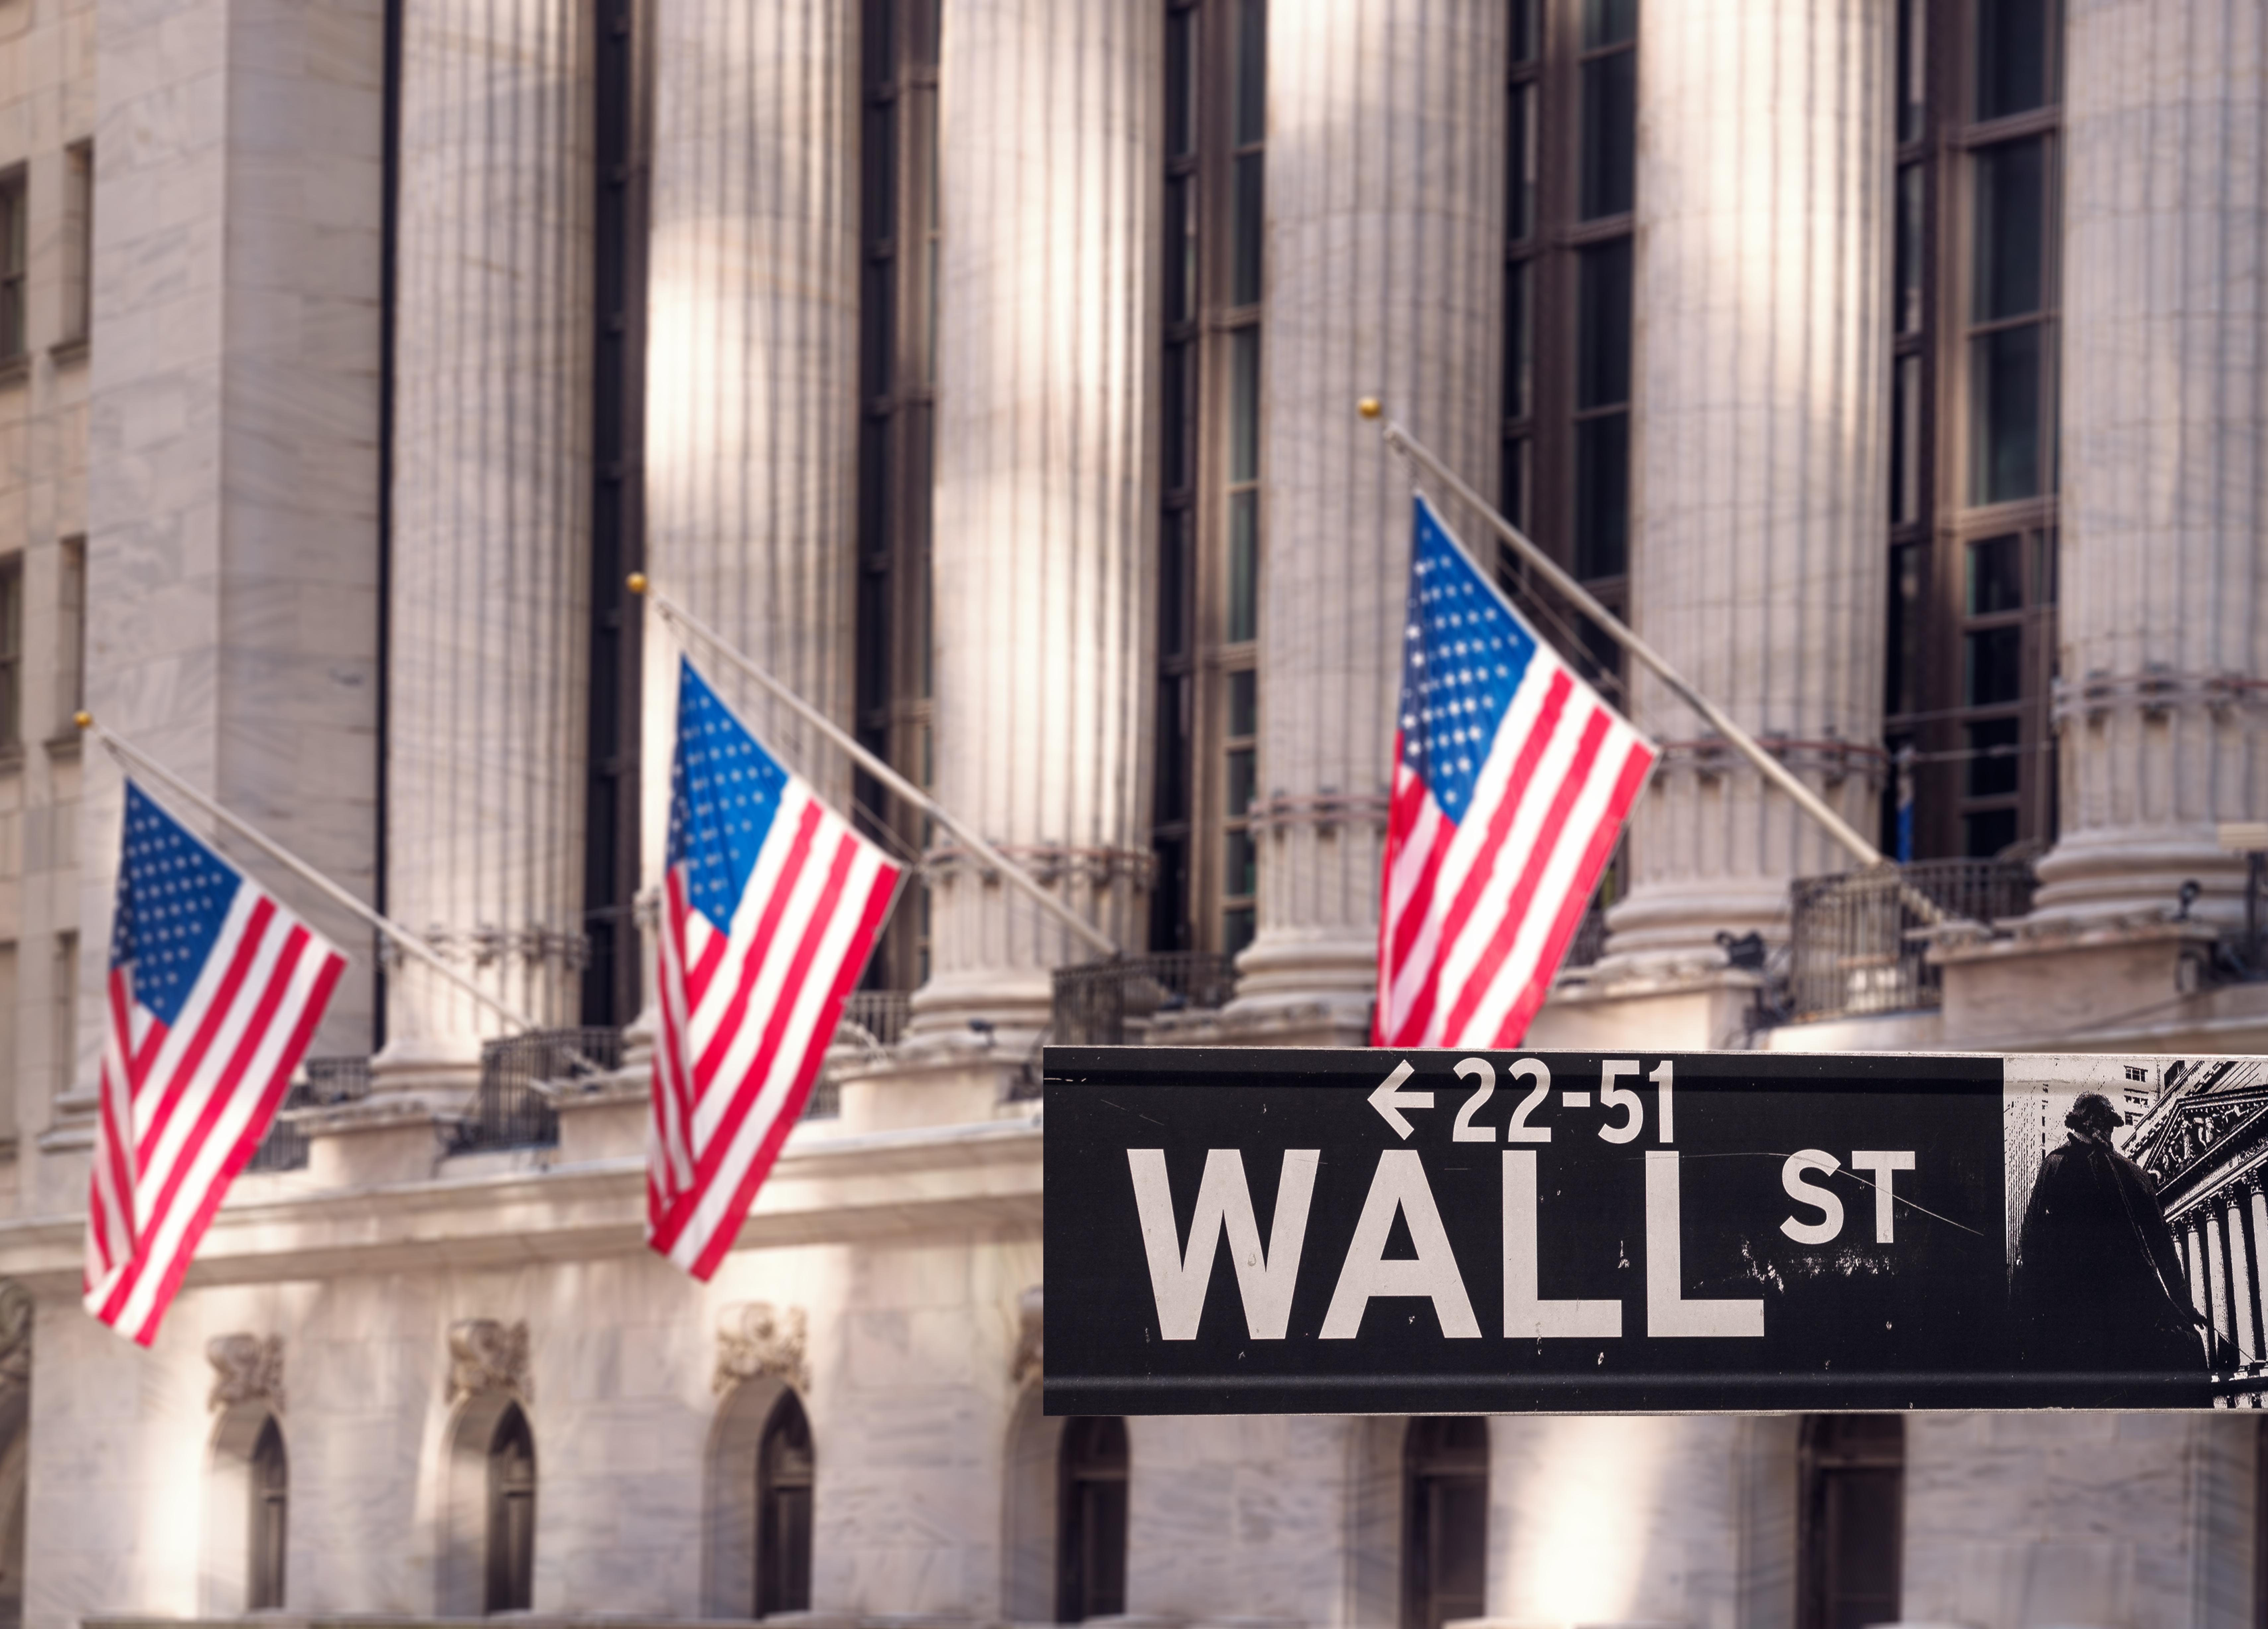 Wall Street sign in front of building with American flags